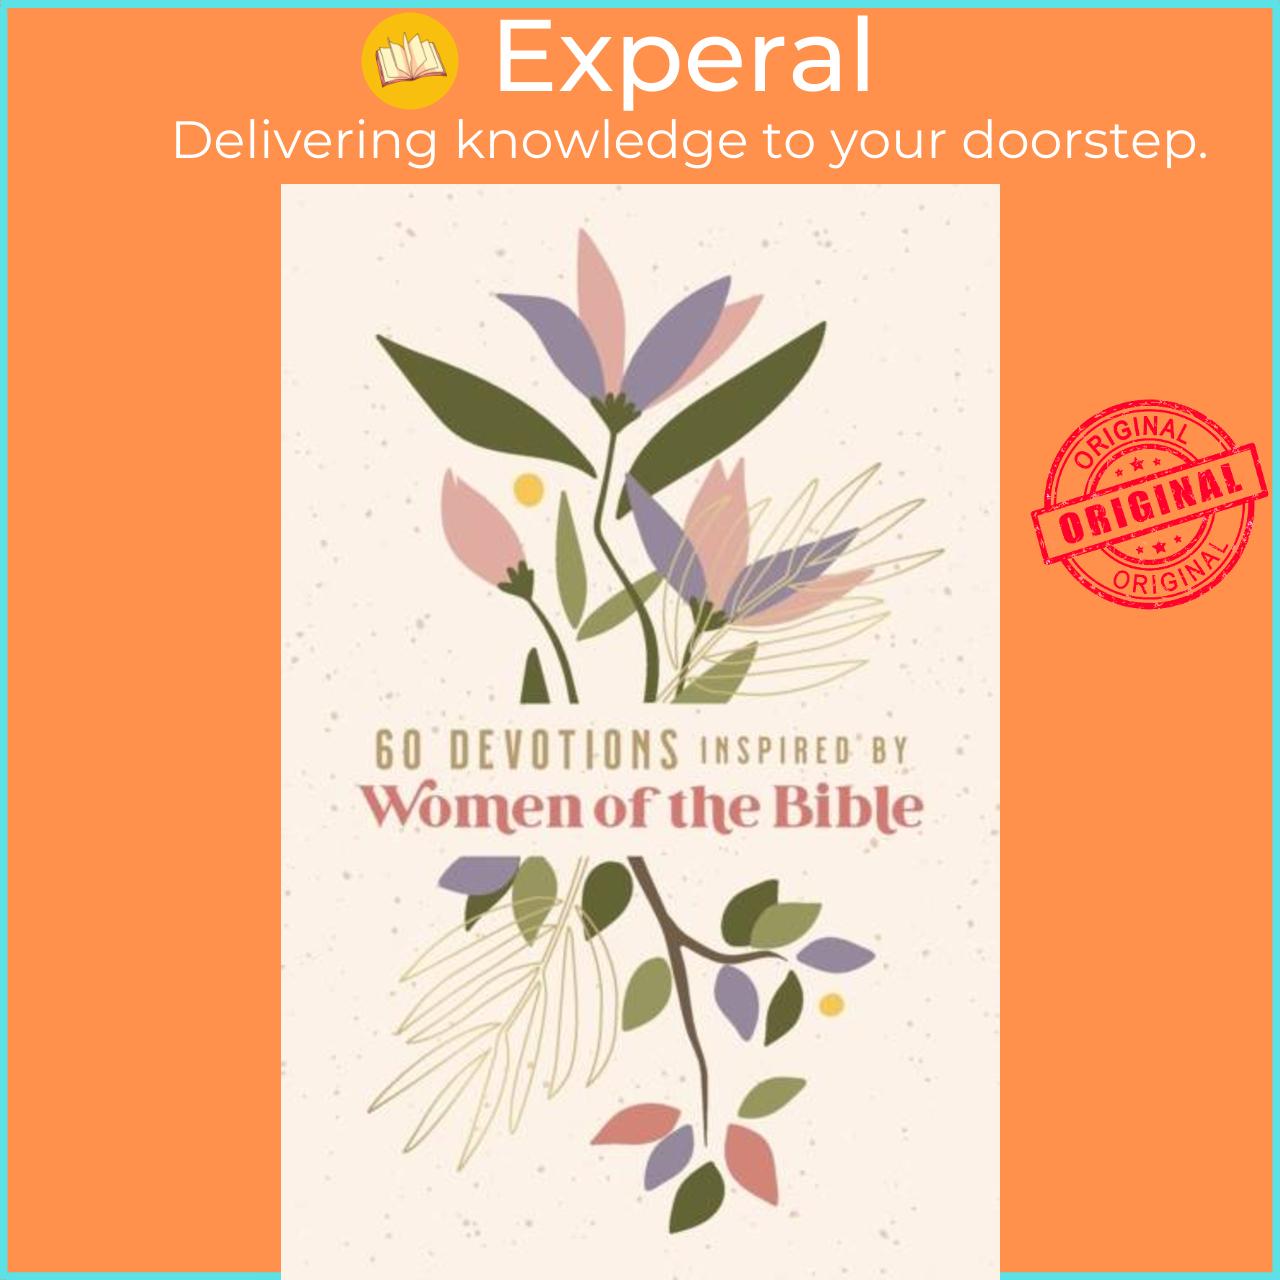 Sách - 60 Devotions Inspired by Women of the Bible by Zondervan (UK edition, paperback)